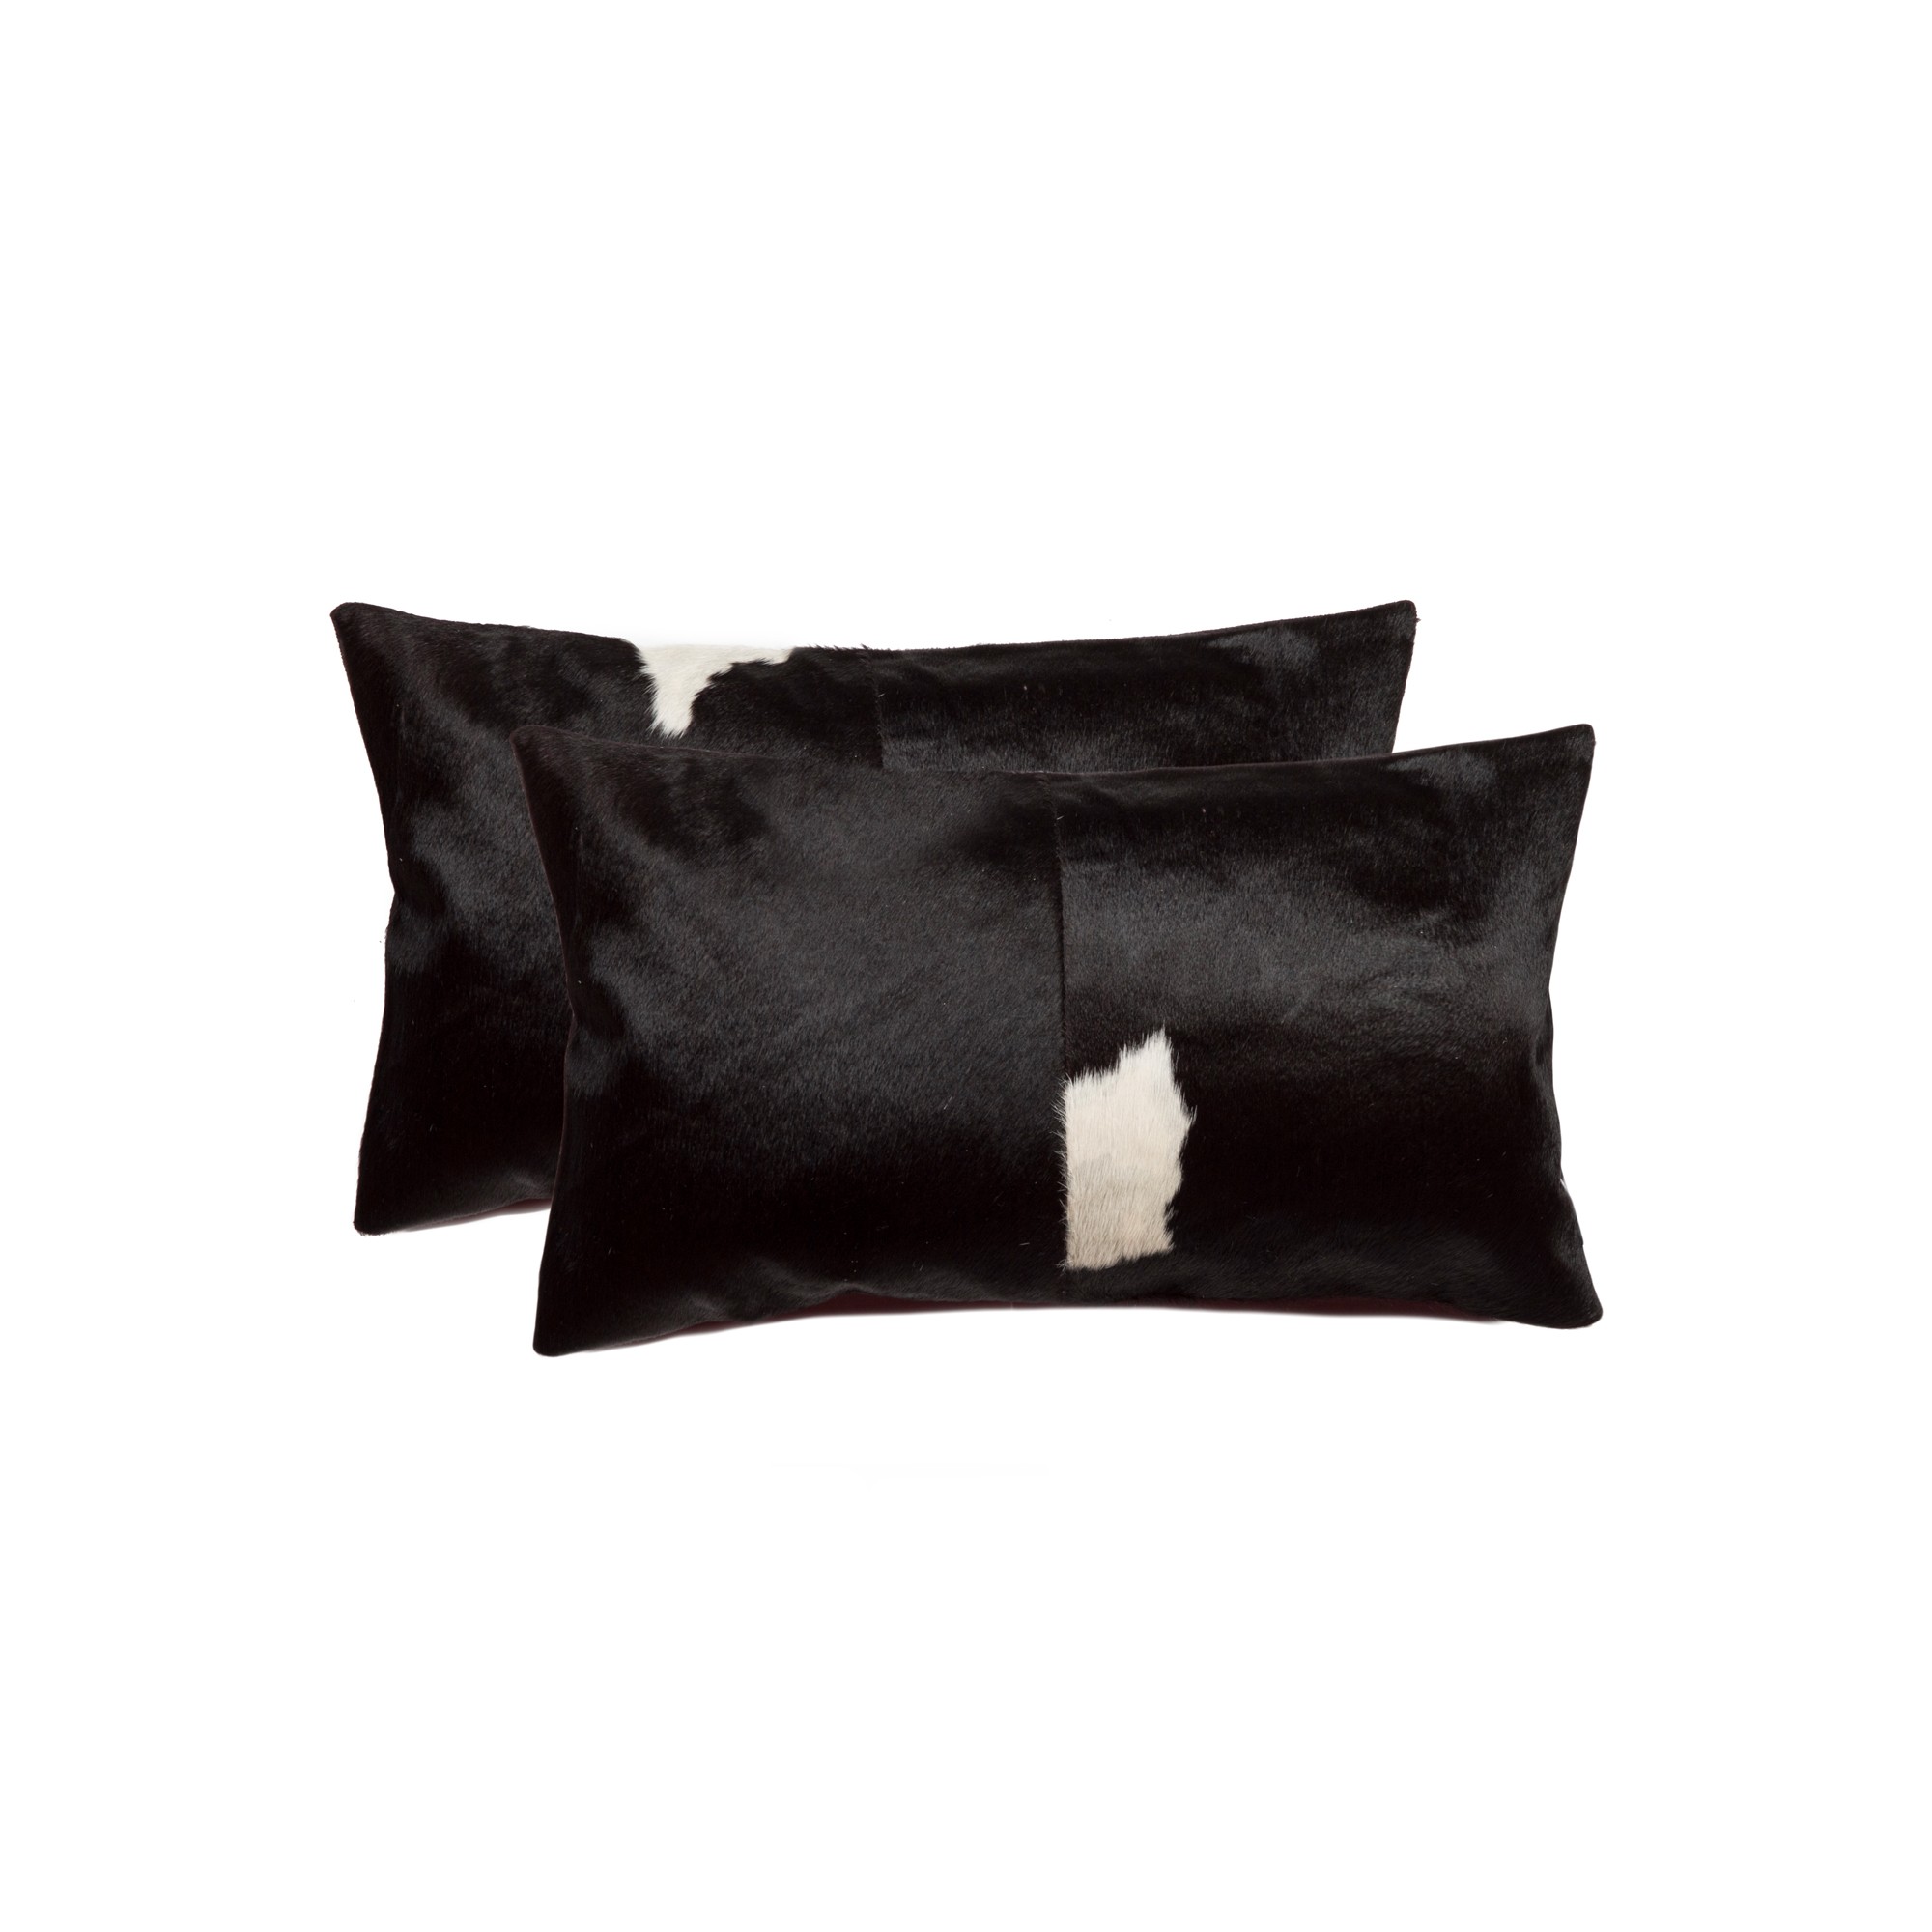 12" x 20" x 5" Black And White, Cowhide - Pillow 2-Pack